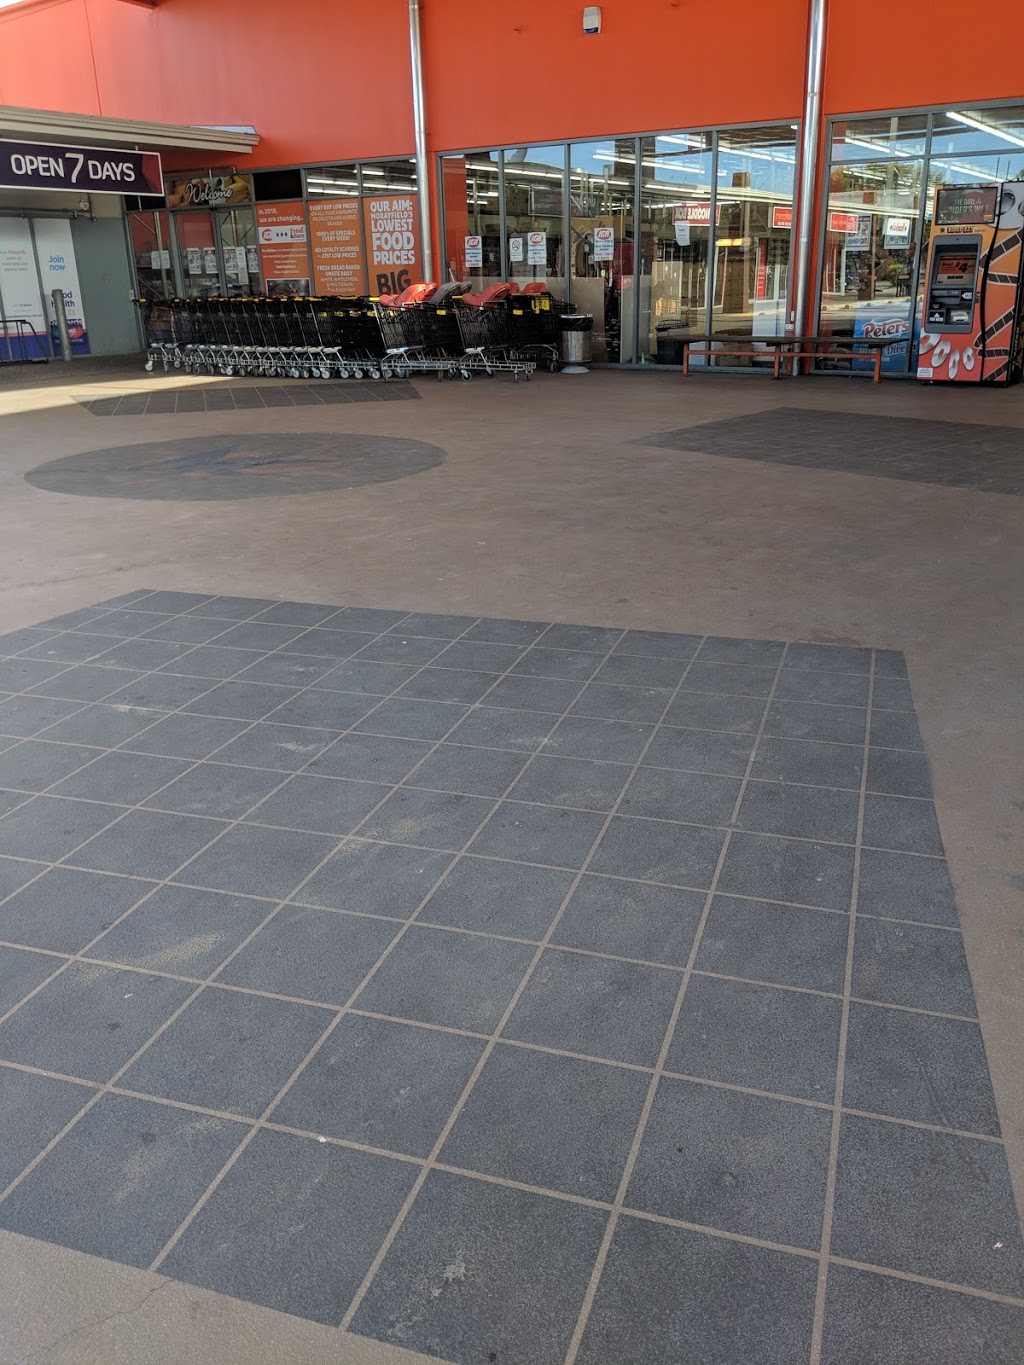 Morayfield Central Shopping Centre | shopping mall | 80 Michael Ave, Morayfield QLD 4506, Australia